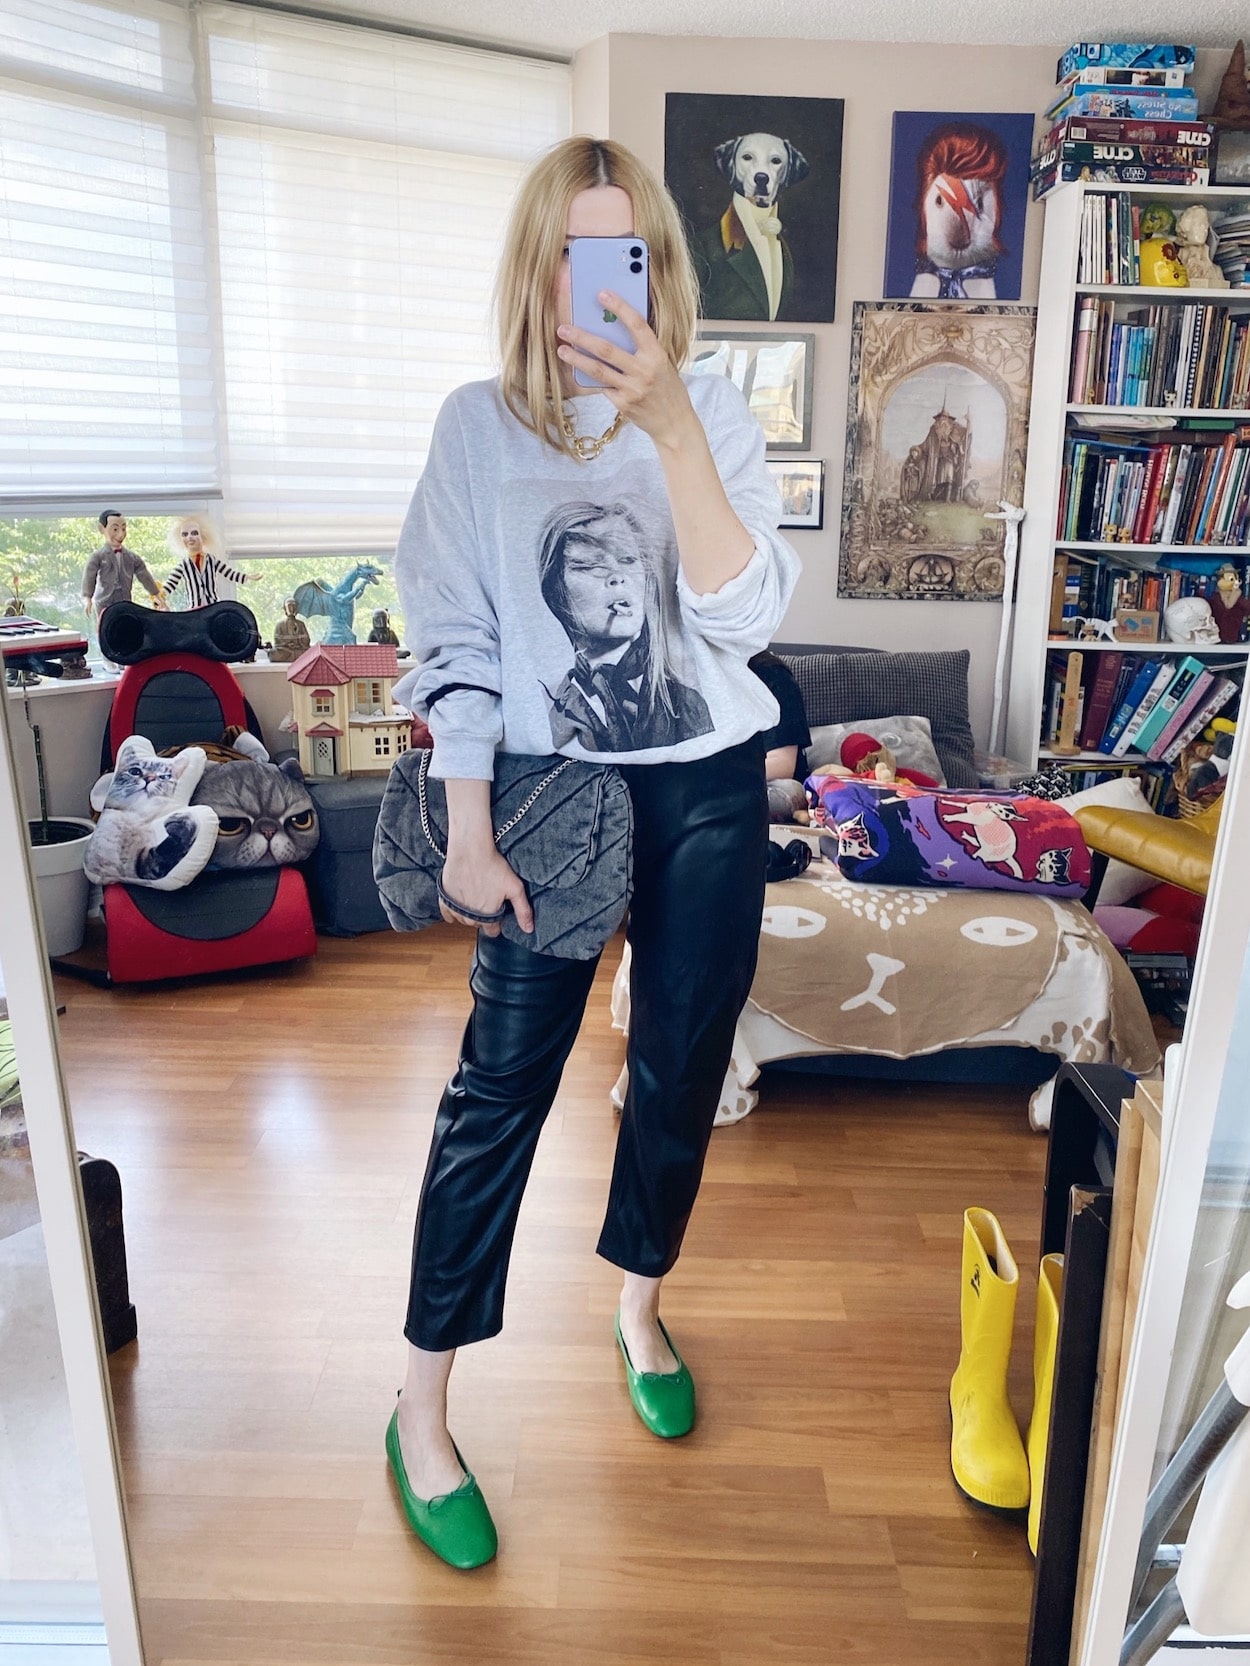 I am wearing an Anine Bing sweatshirt, faux leather trousers, a Jenny Bird necklace, green flats, and a grey Zara bag.